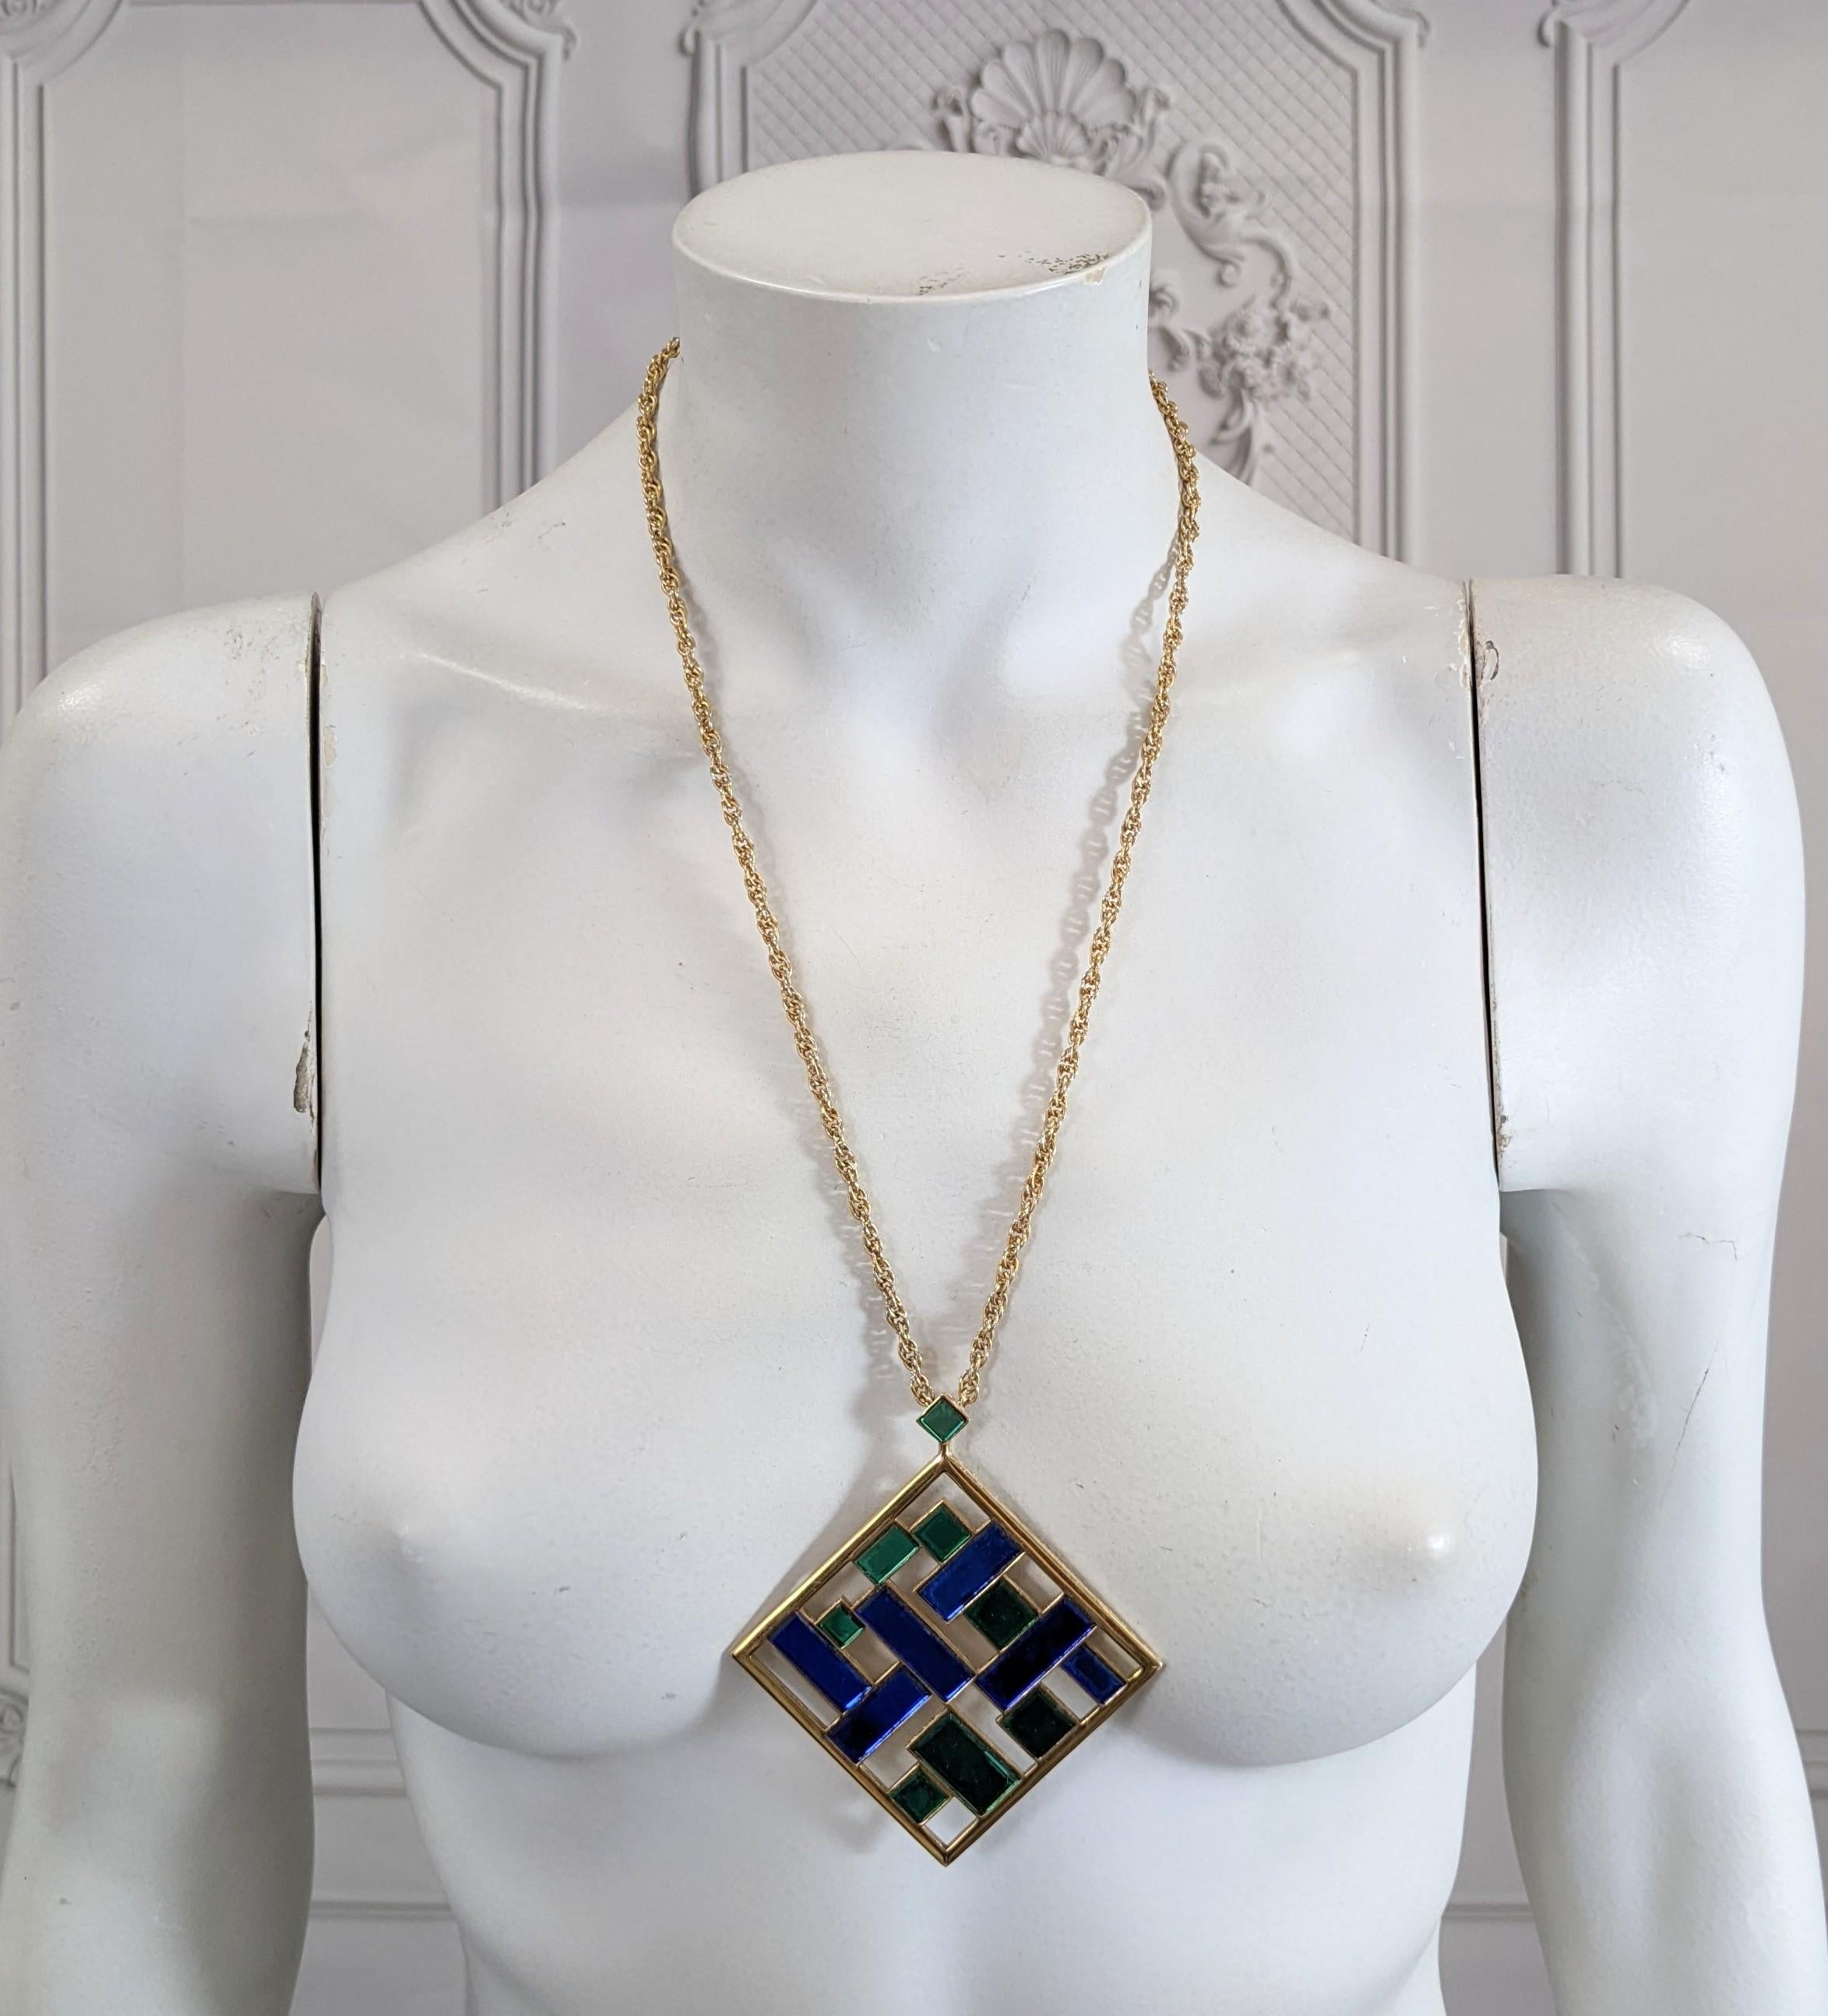 Trifari Mirrored Tile Modernist Pendant In Excellent Condition For Sale In New York, NY